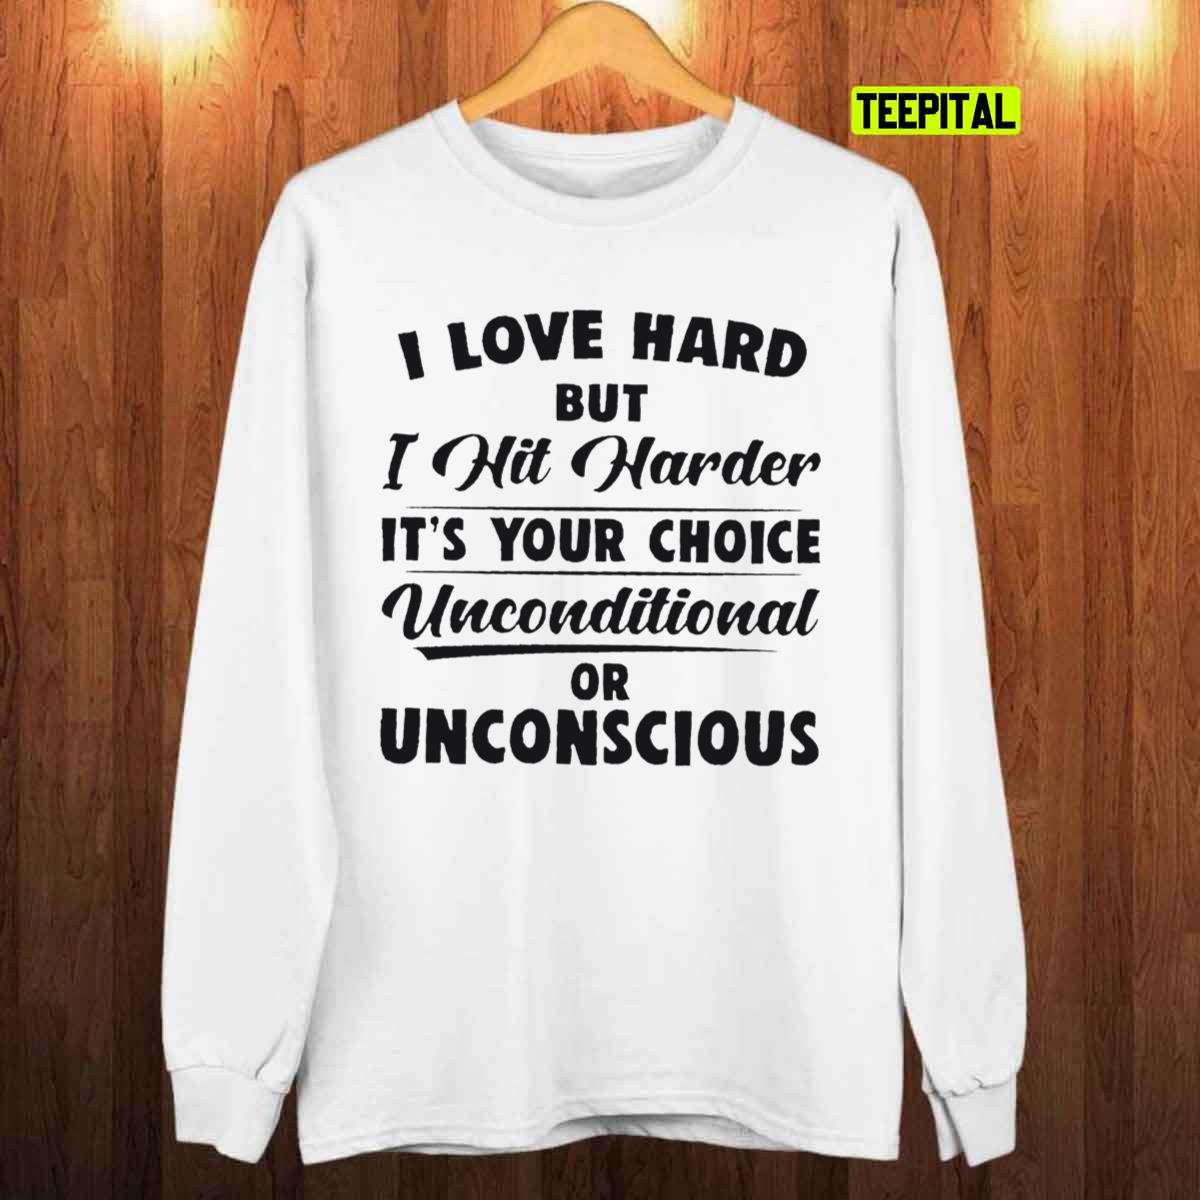 I Love Hard But I Hit Harder It’s Your Choice Unconditional Or Unconscious T-Shirt